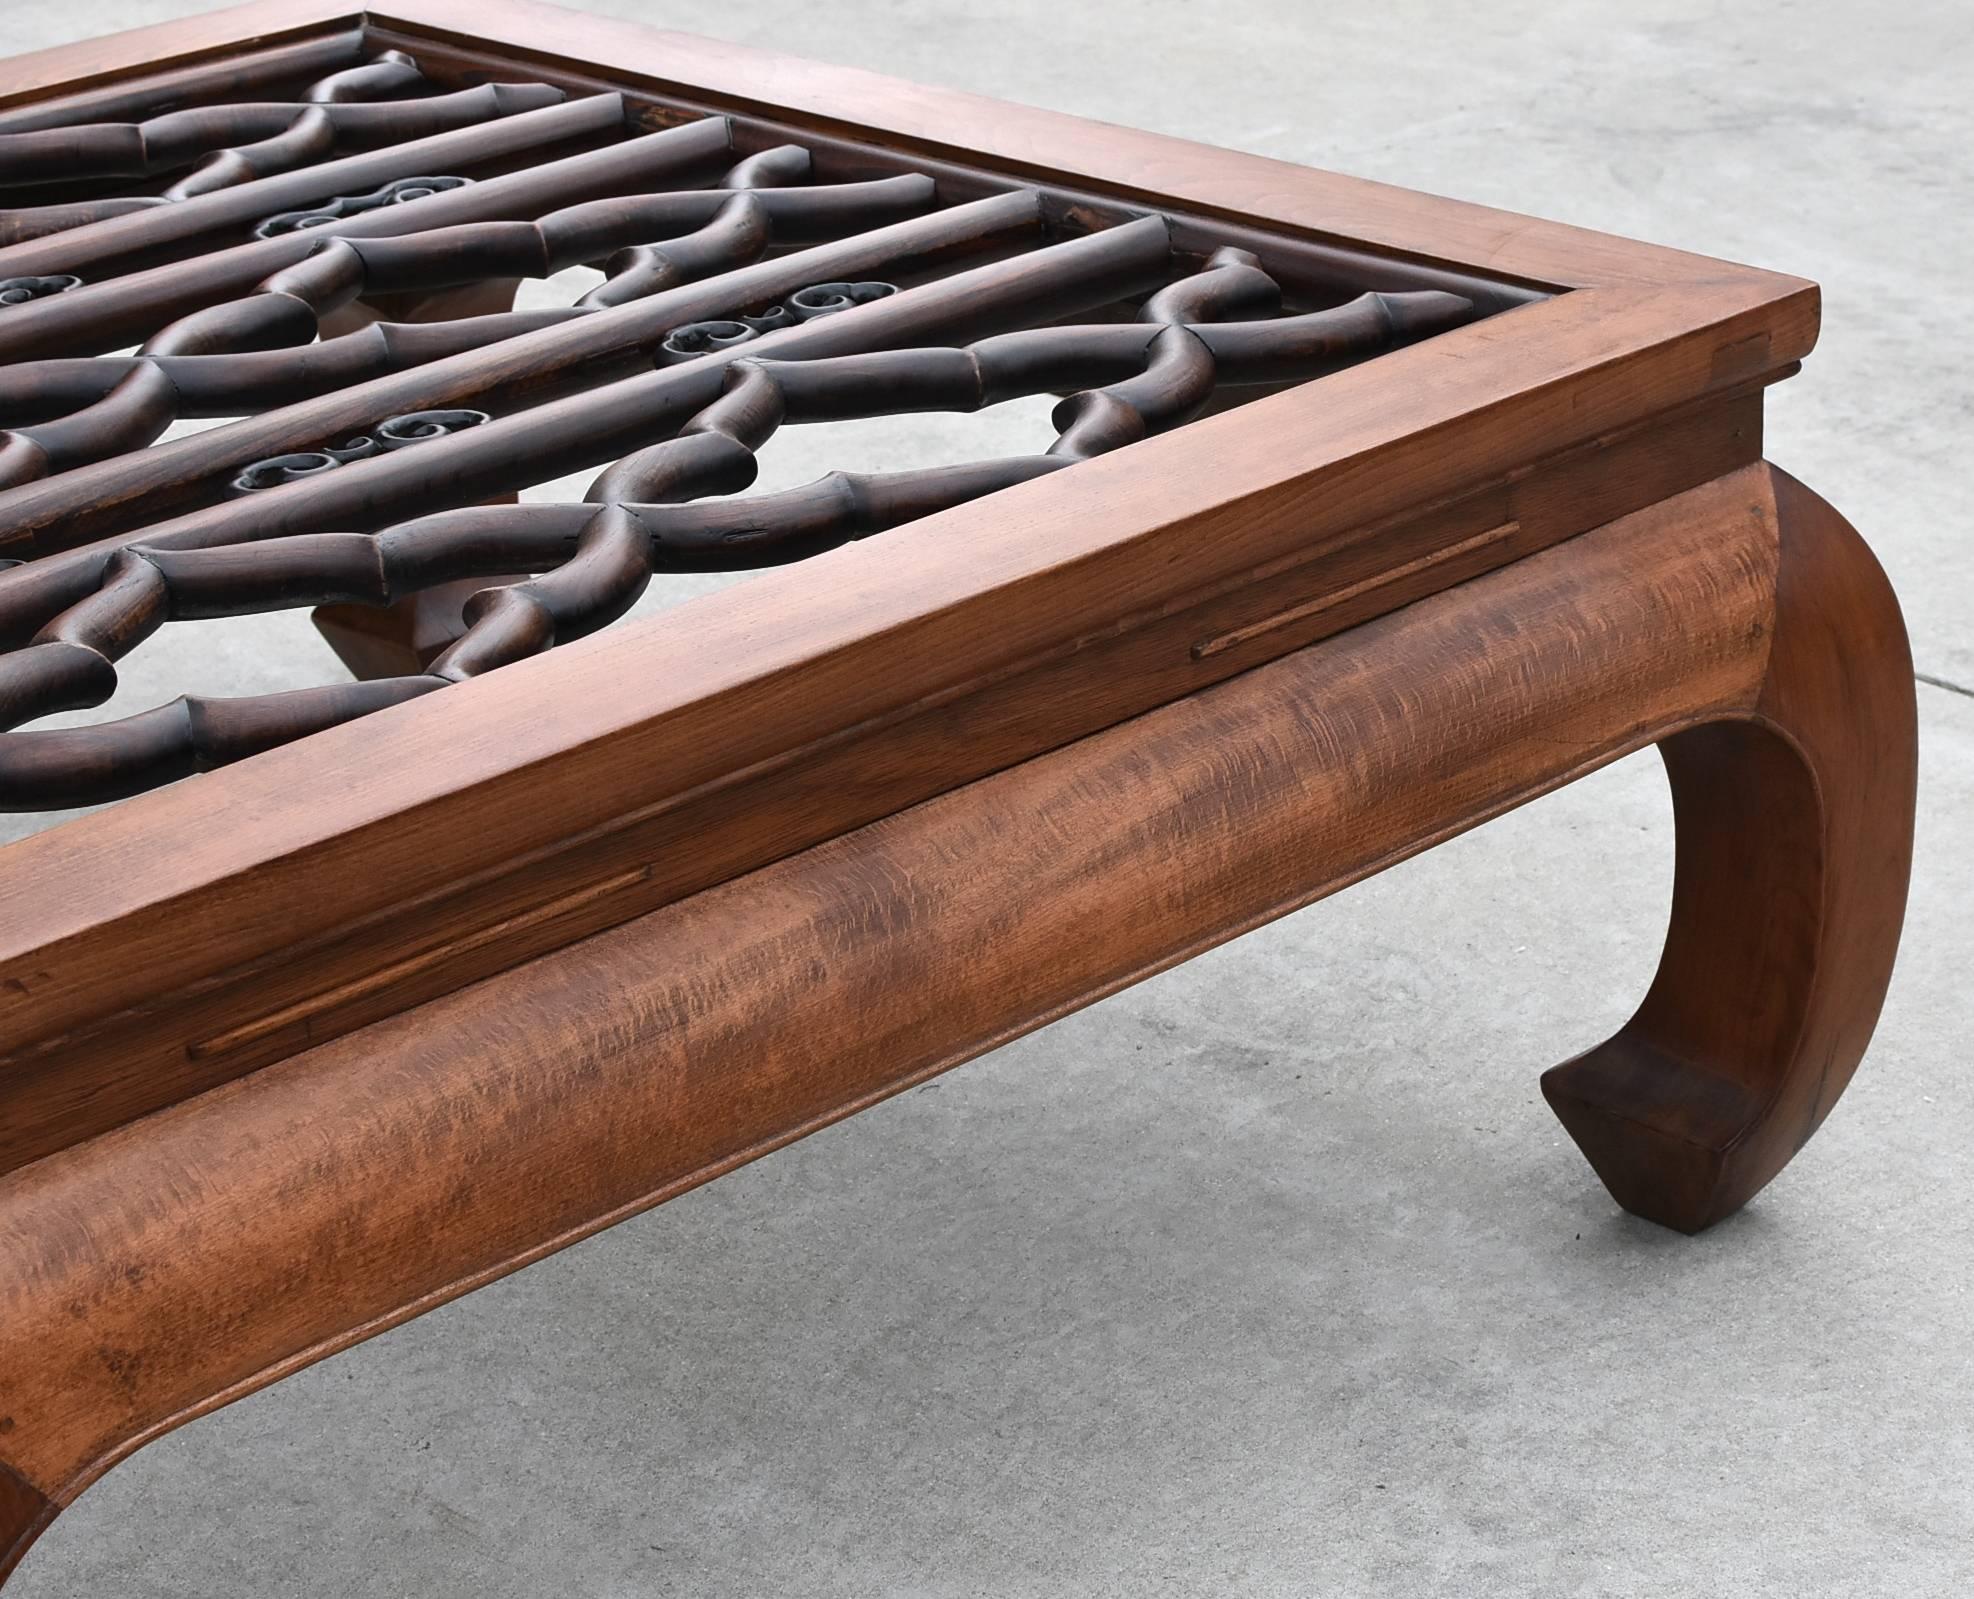 Wood Large Asian Square Coffee Table with Antique Screen Banana Legs